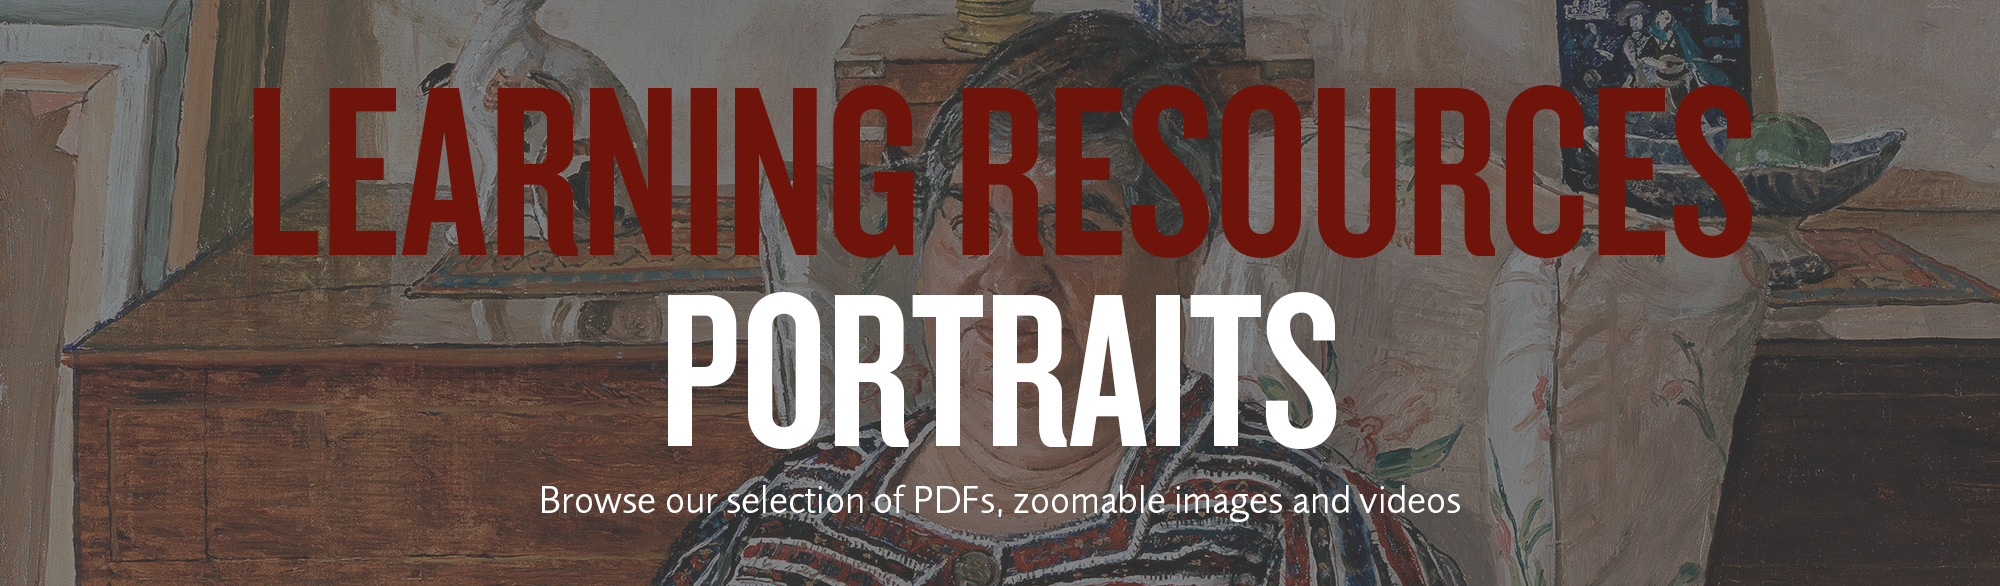 Learning resources Portraits